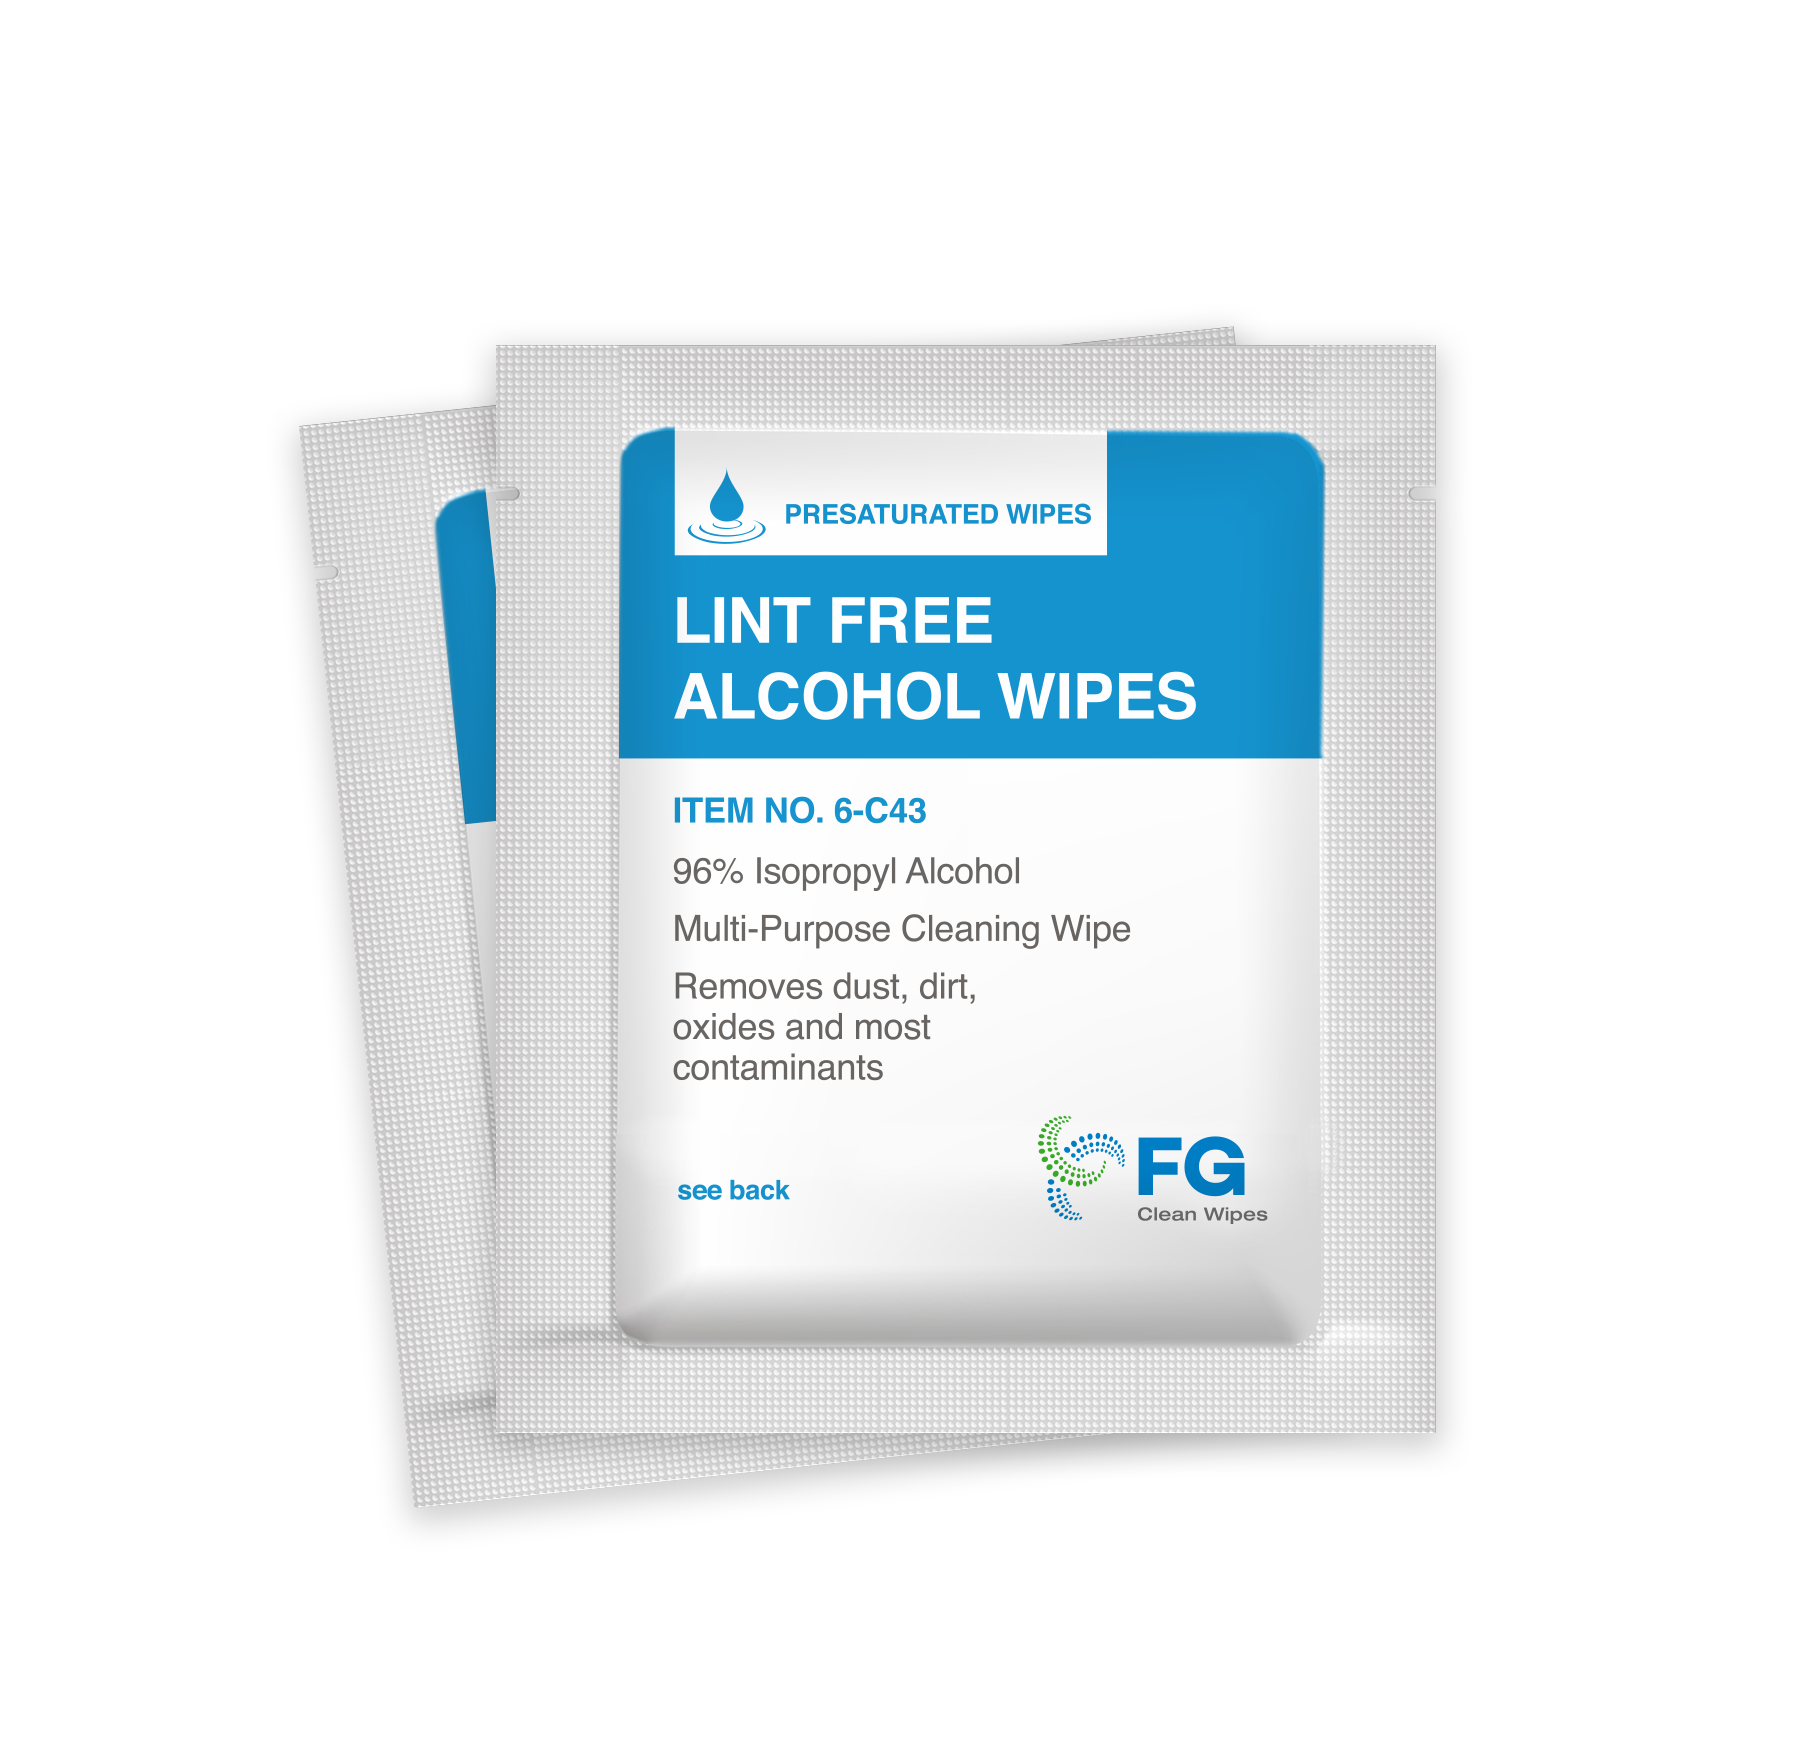 Alcohol Wipes - FG Clean Wipes - Misc. Plastic Tools